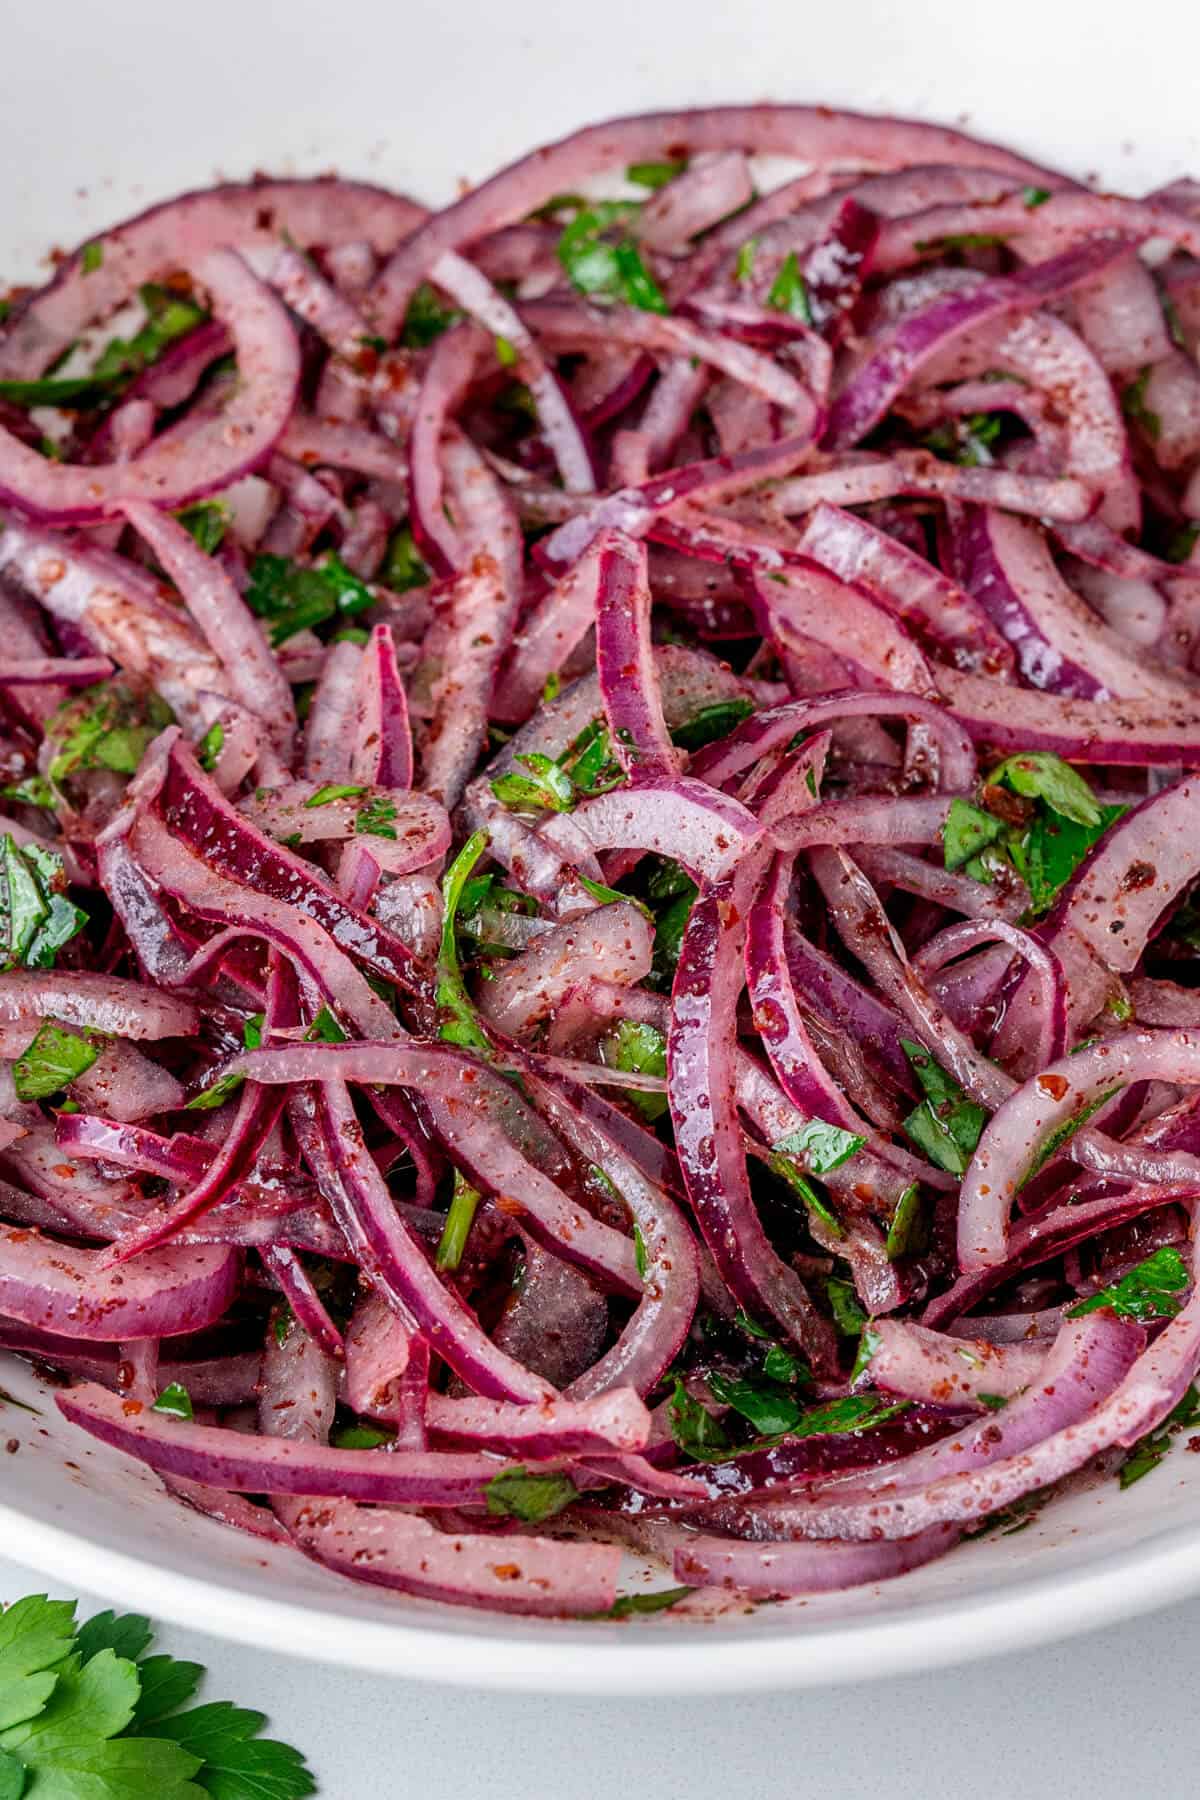 Turkish style marinated onions in a bowl